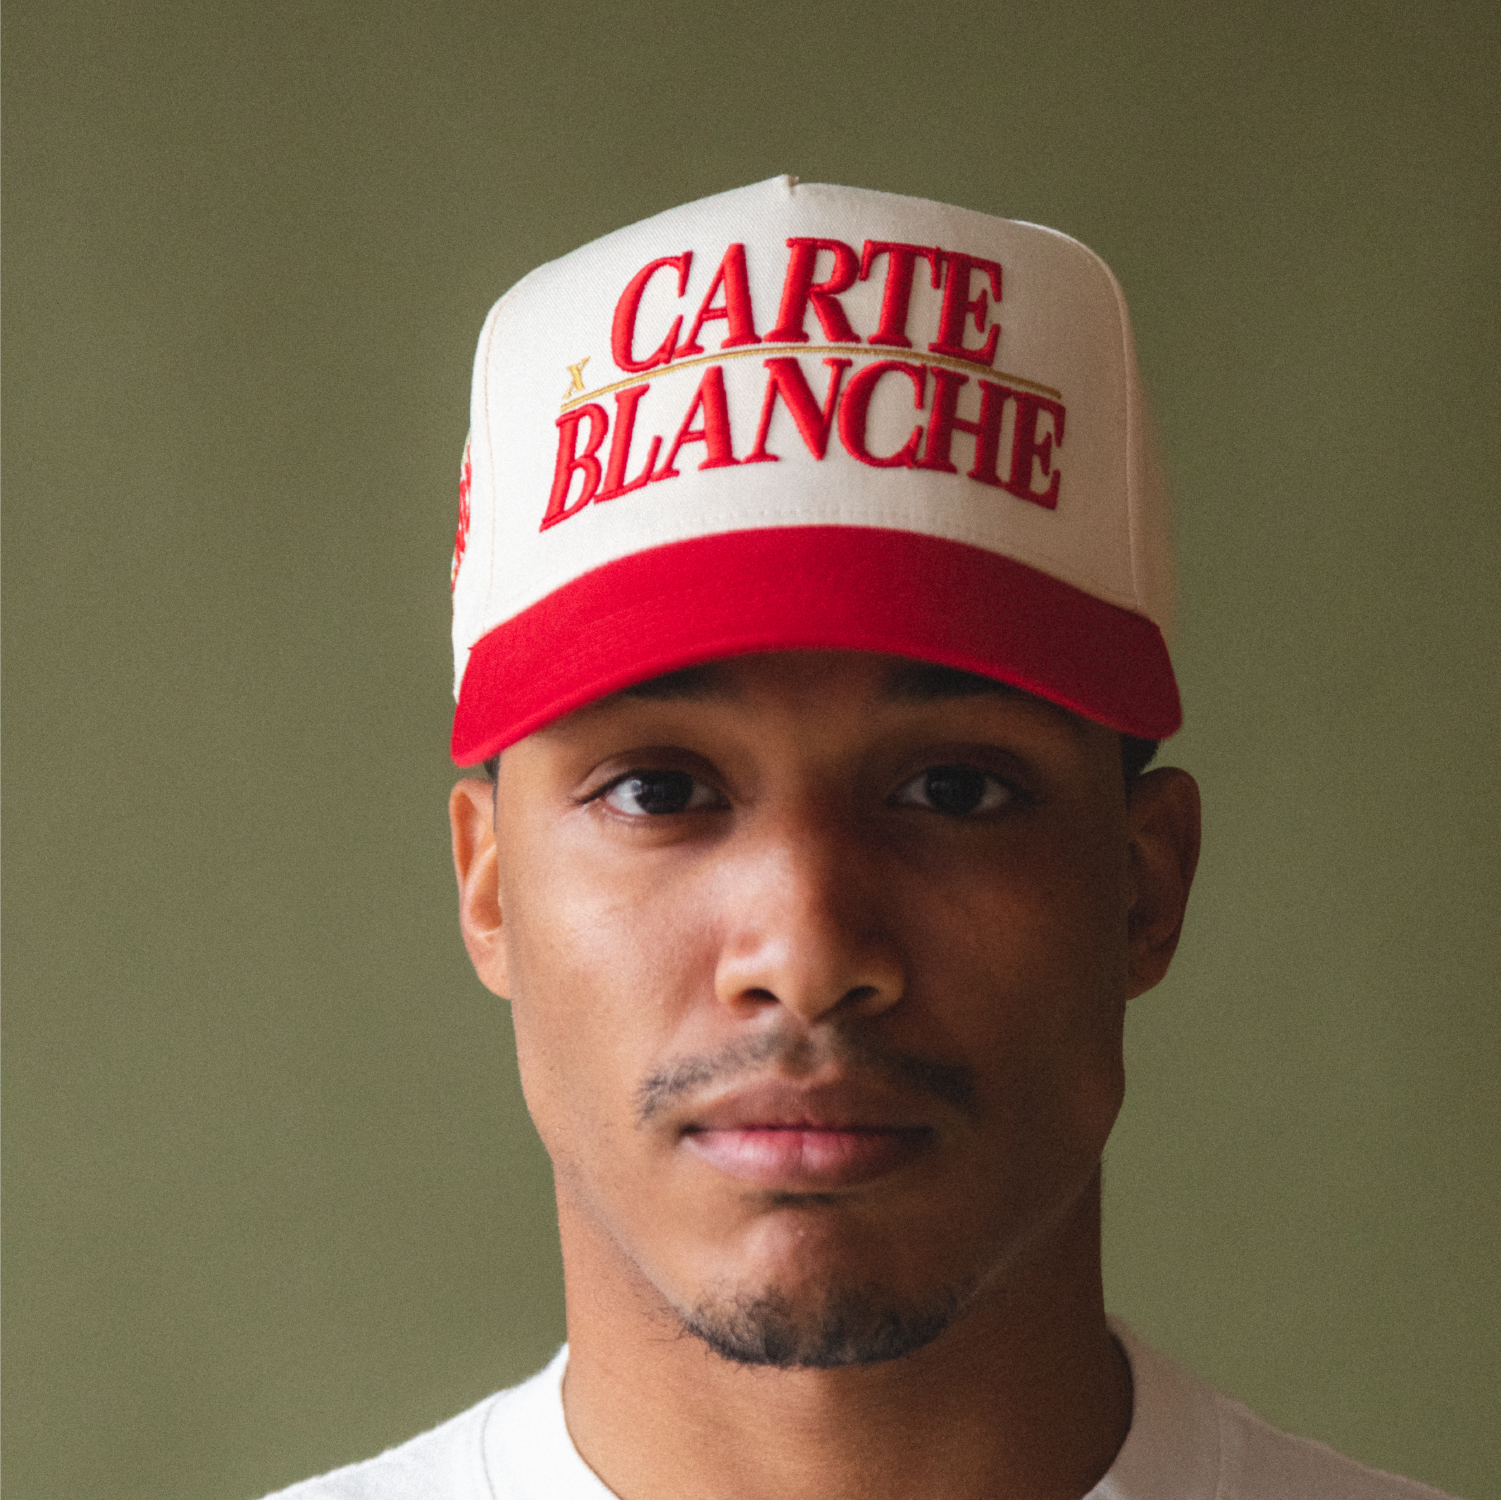 The Classic Two-Tone Snapback // Red & Créme